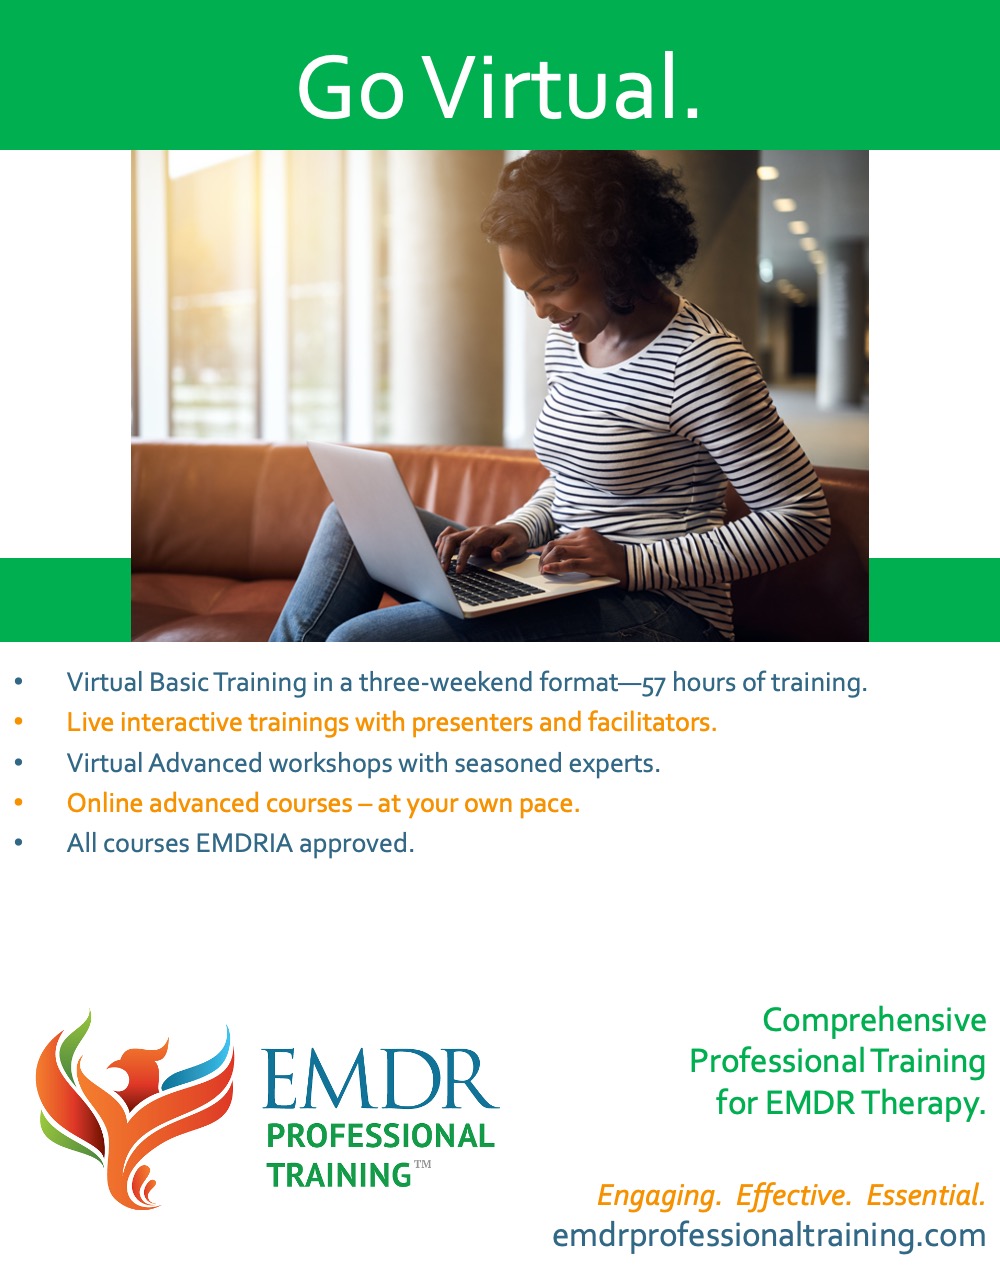 Comprehensive professional training for EMDR therapy